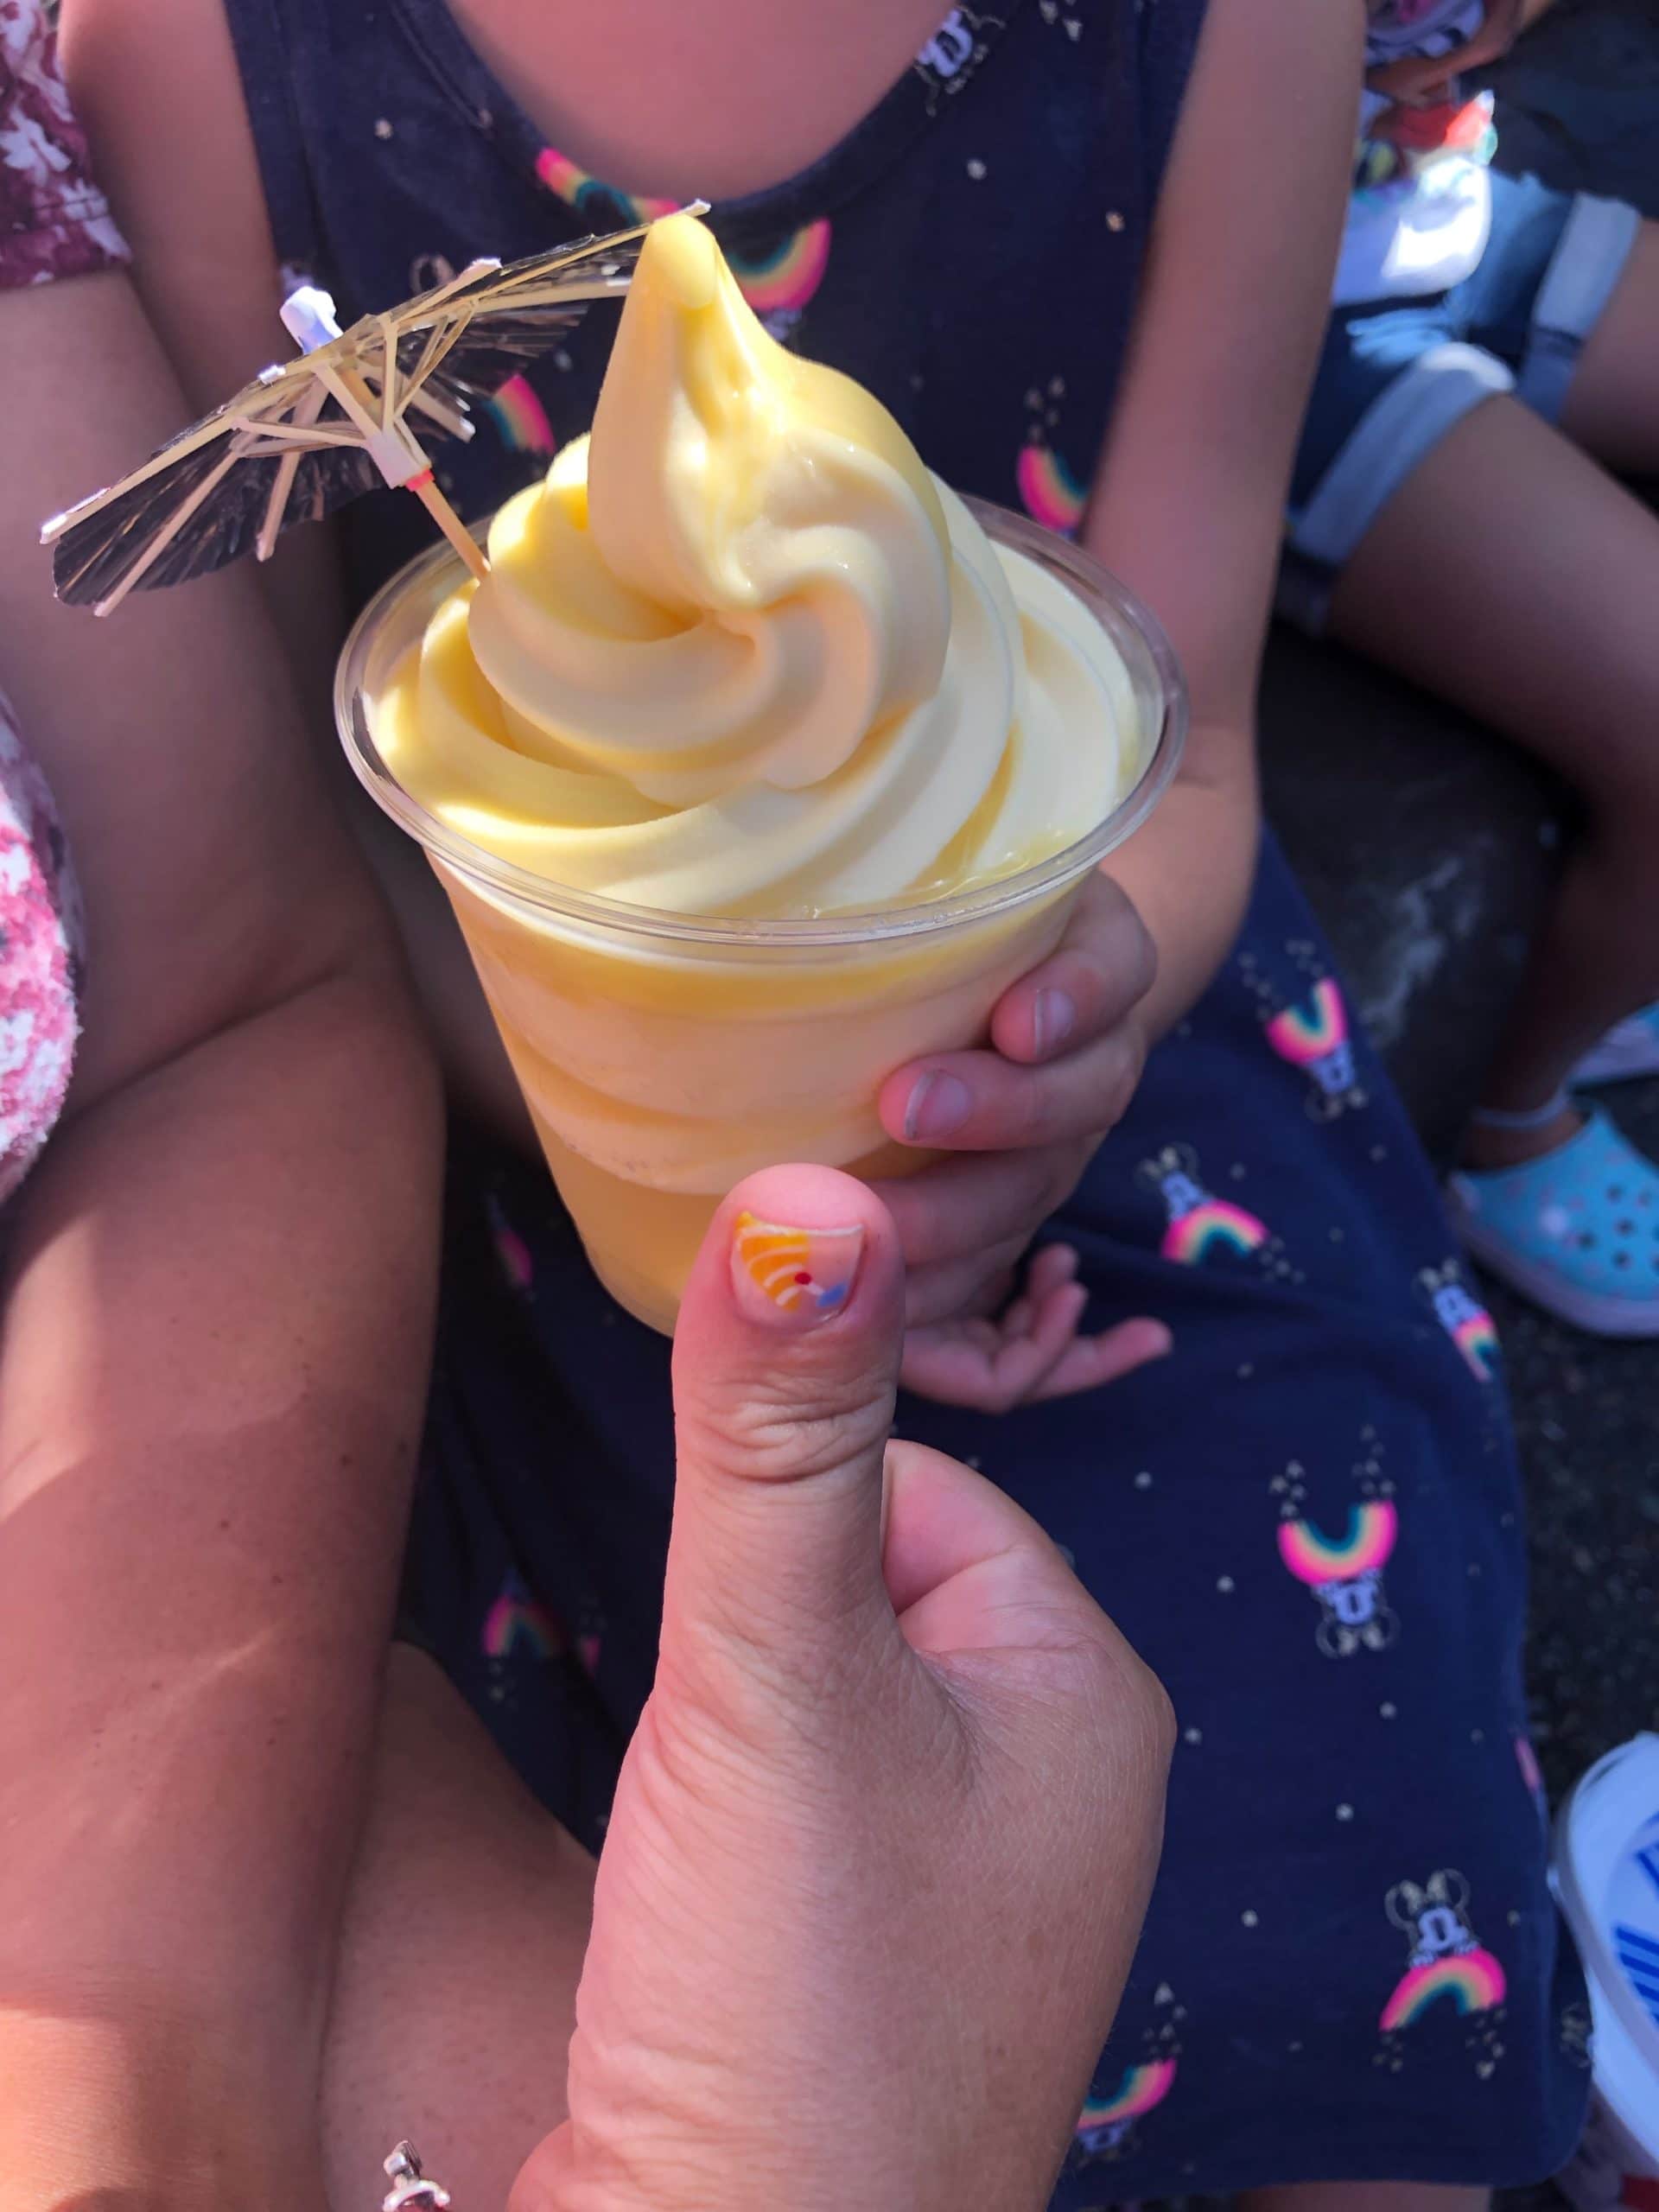 With a colorful-flair-bedecked thumb giving a big thumbs-up in the foreground, the additional hands of someone wearing a blue and pink dress lovingly clasp the invitingly yellow Pineapple Dole Whip that is one of the most beloved staple treats of Disneyland California for visiting families of all shapes, sizes and backgrounds (especially with its cute little umbrella topper.)